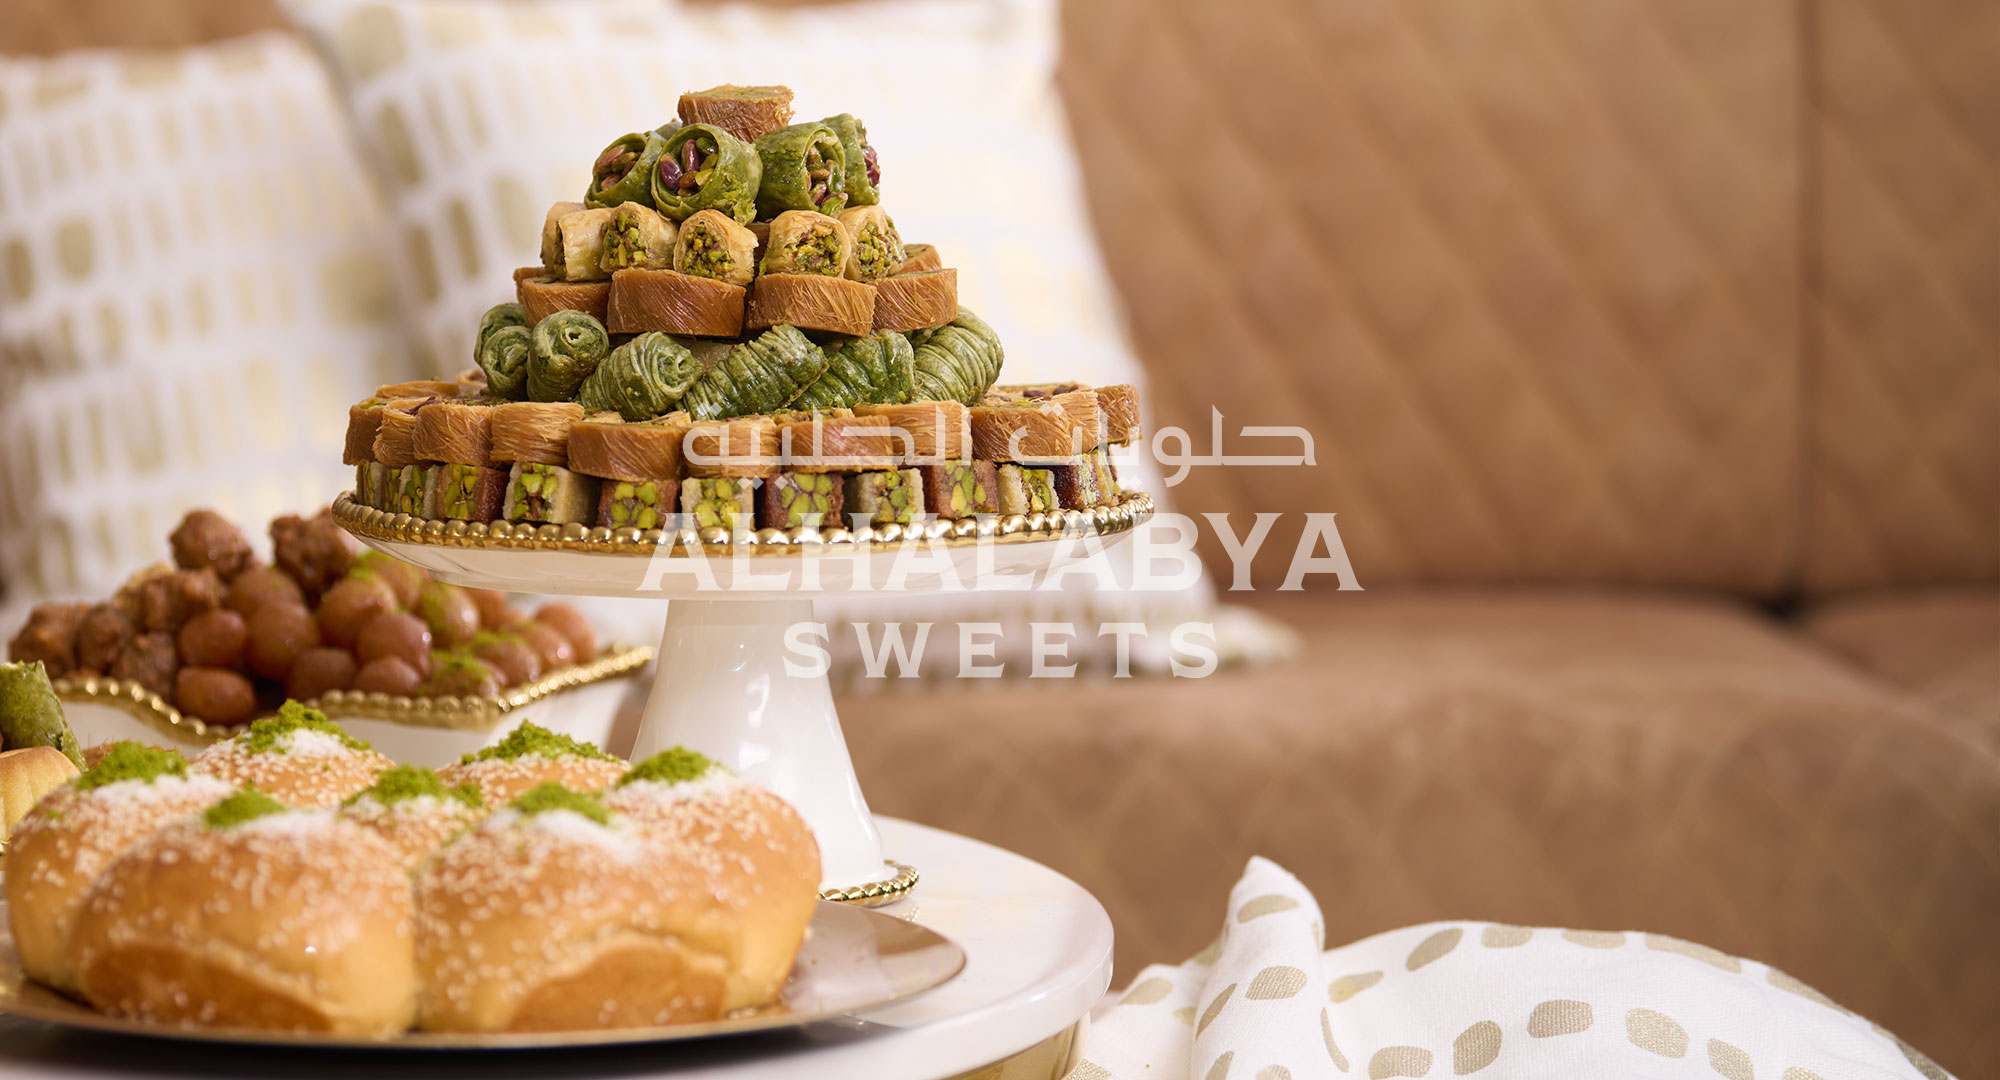 How to Order from Al Halabya Sweets in Dubai